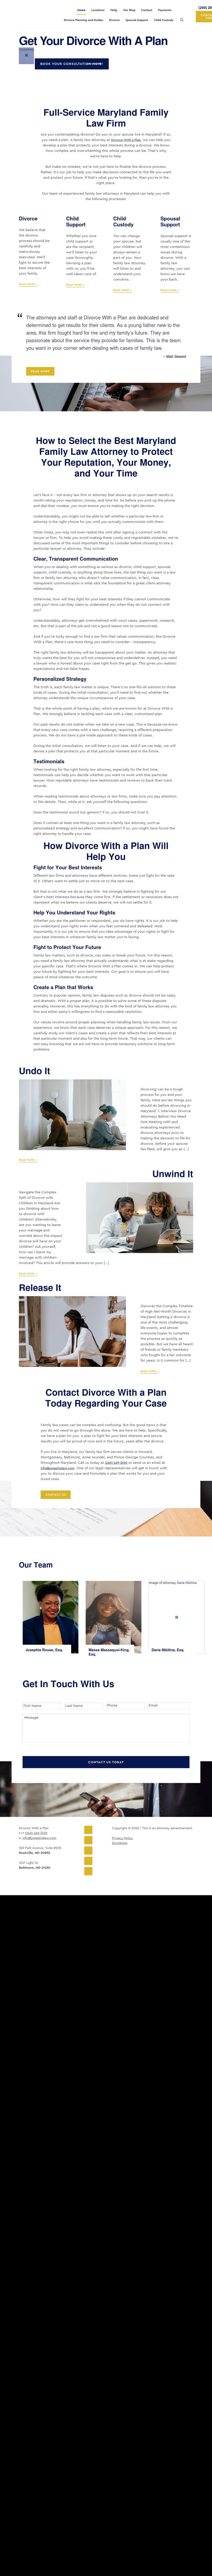 Divorce With A Plan - Baltimore MD Lawyers